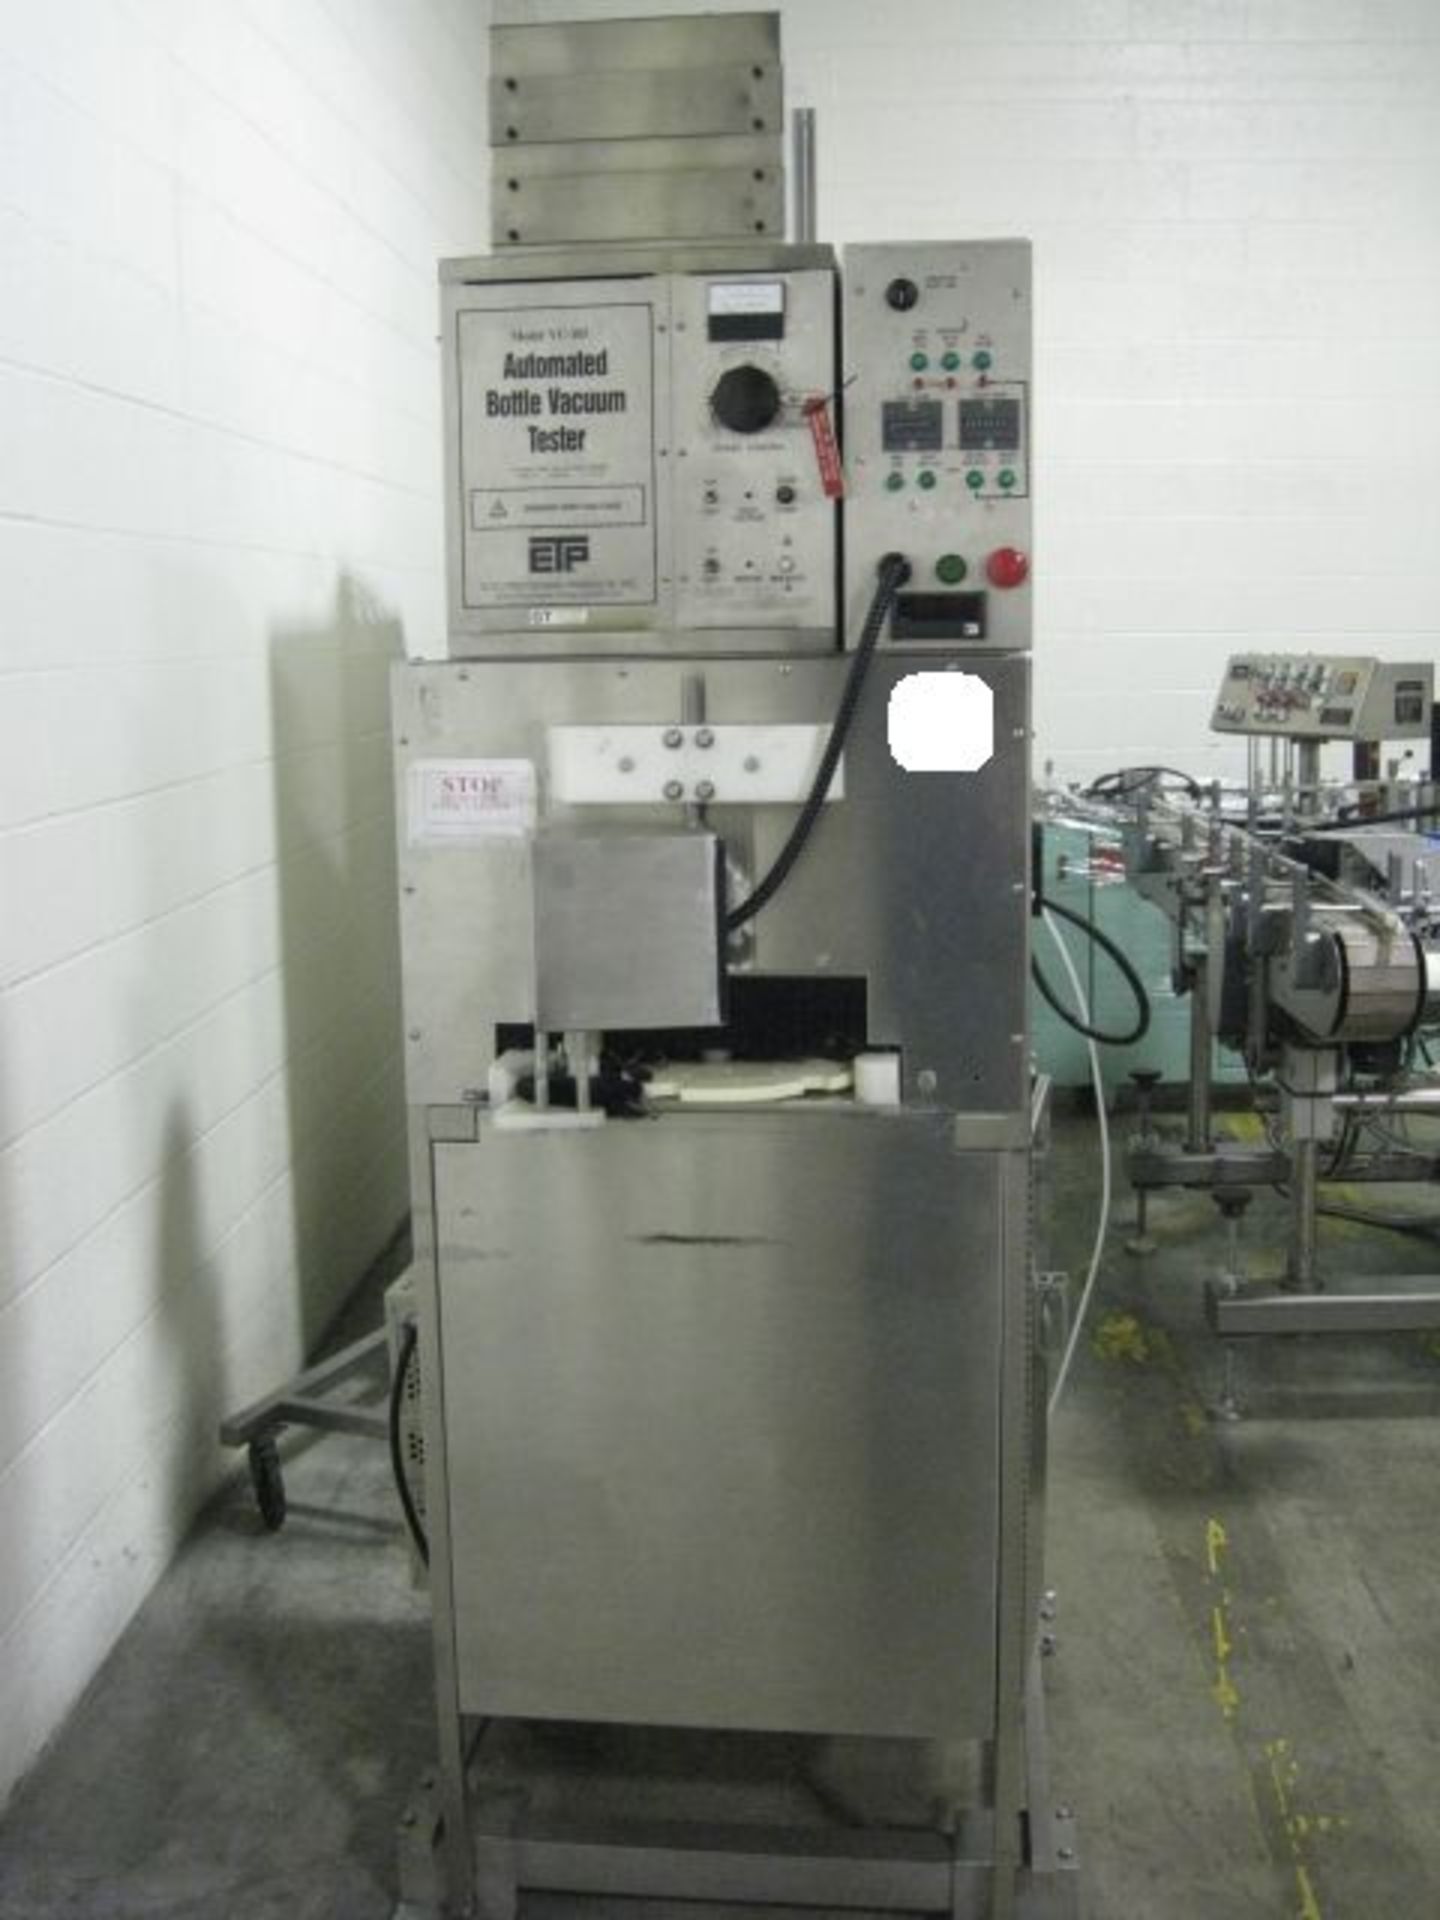 Electro Technic Products automated bottle vacuum tester, model VC-105